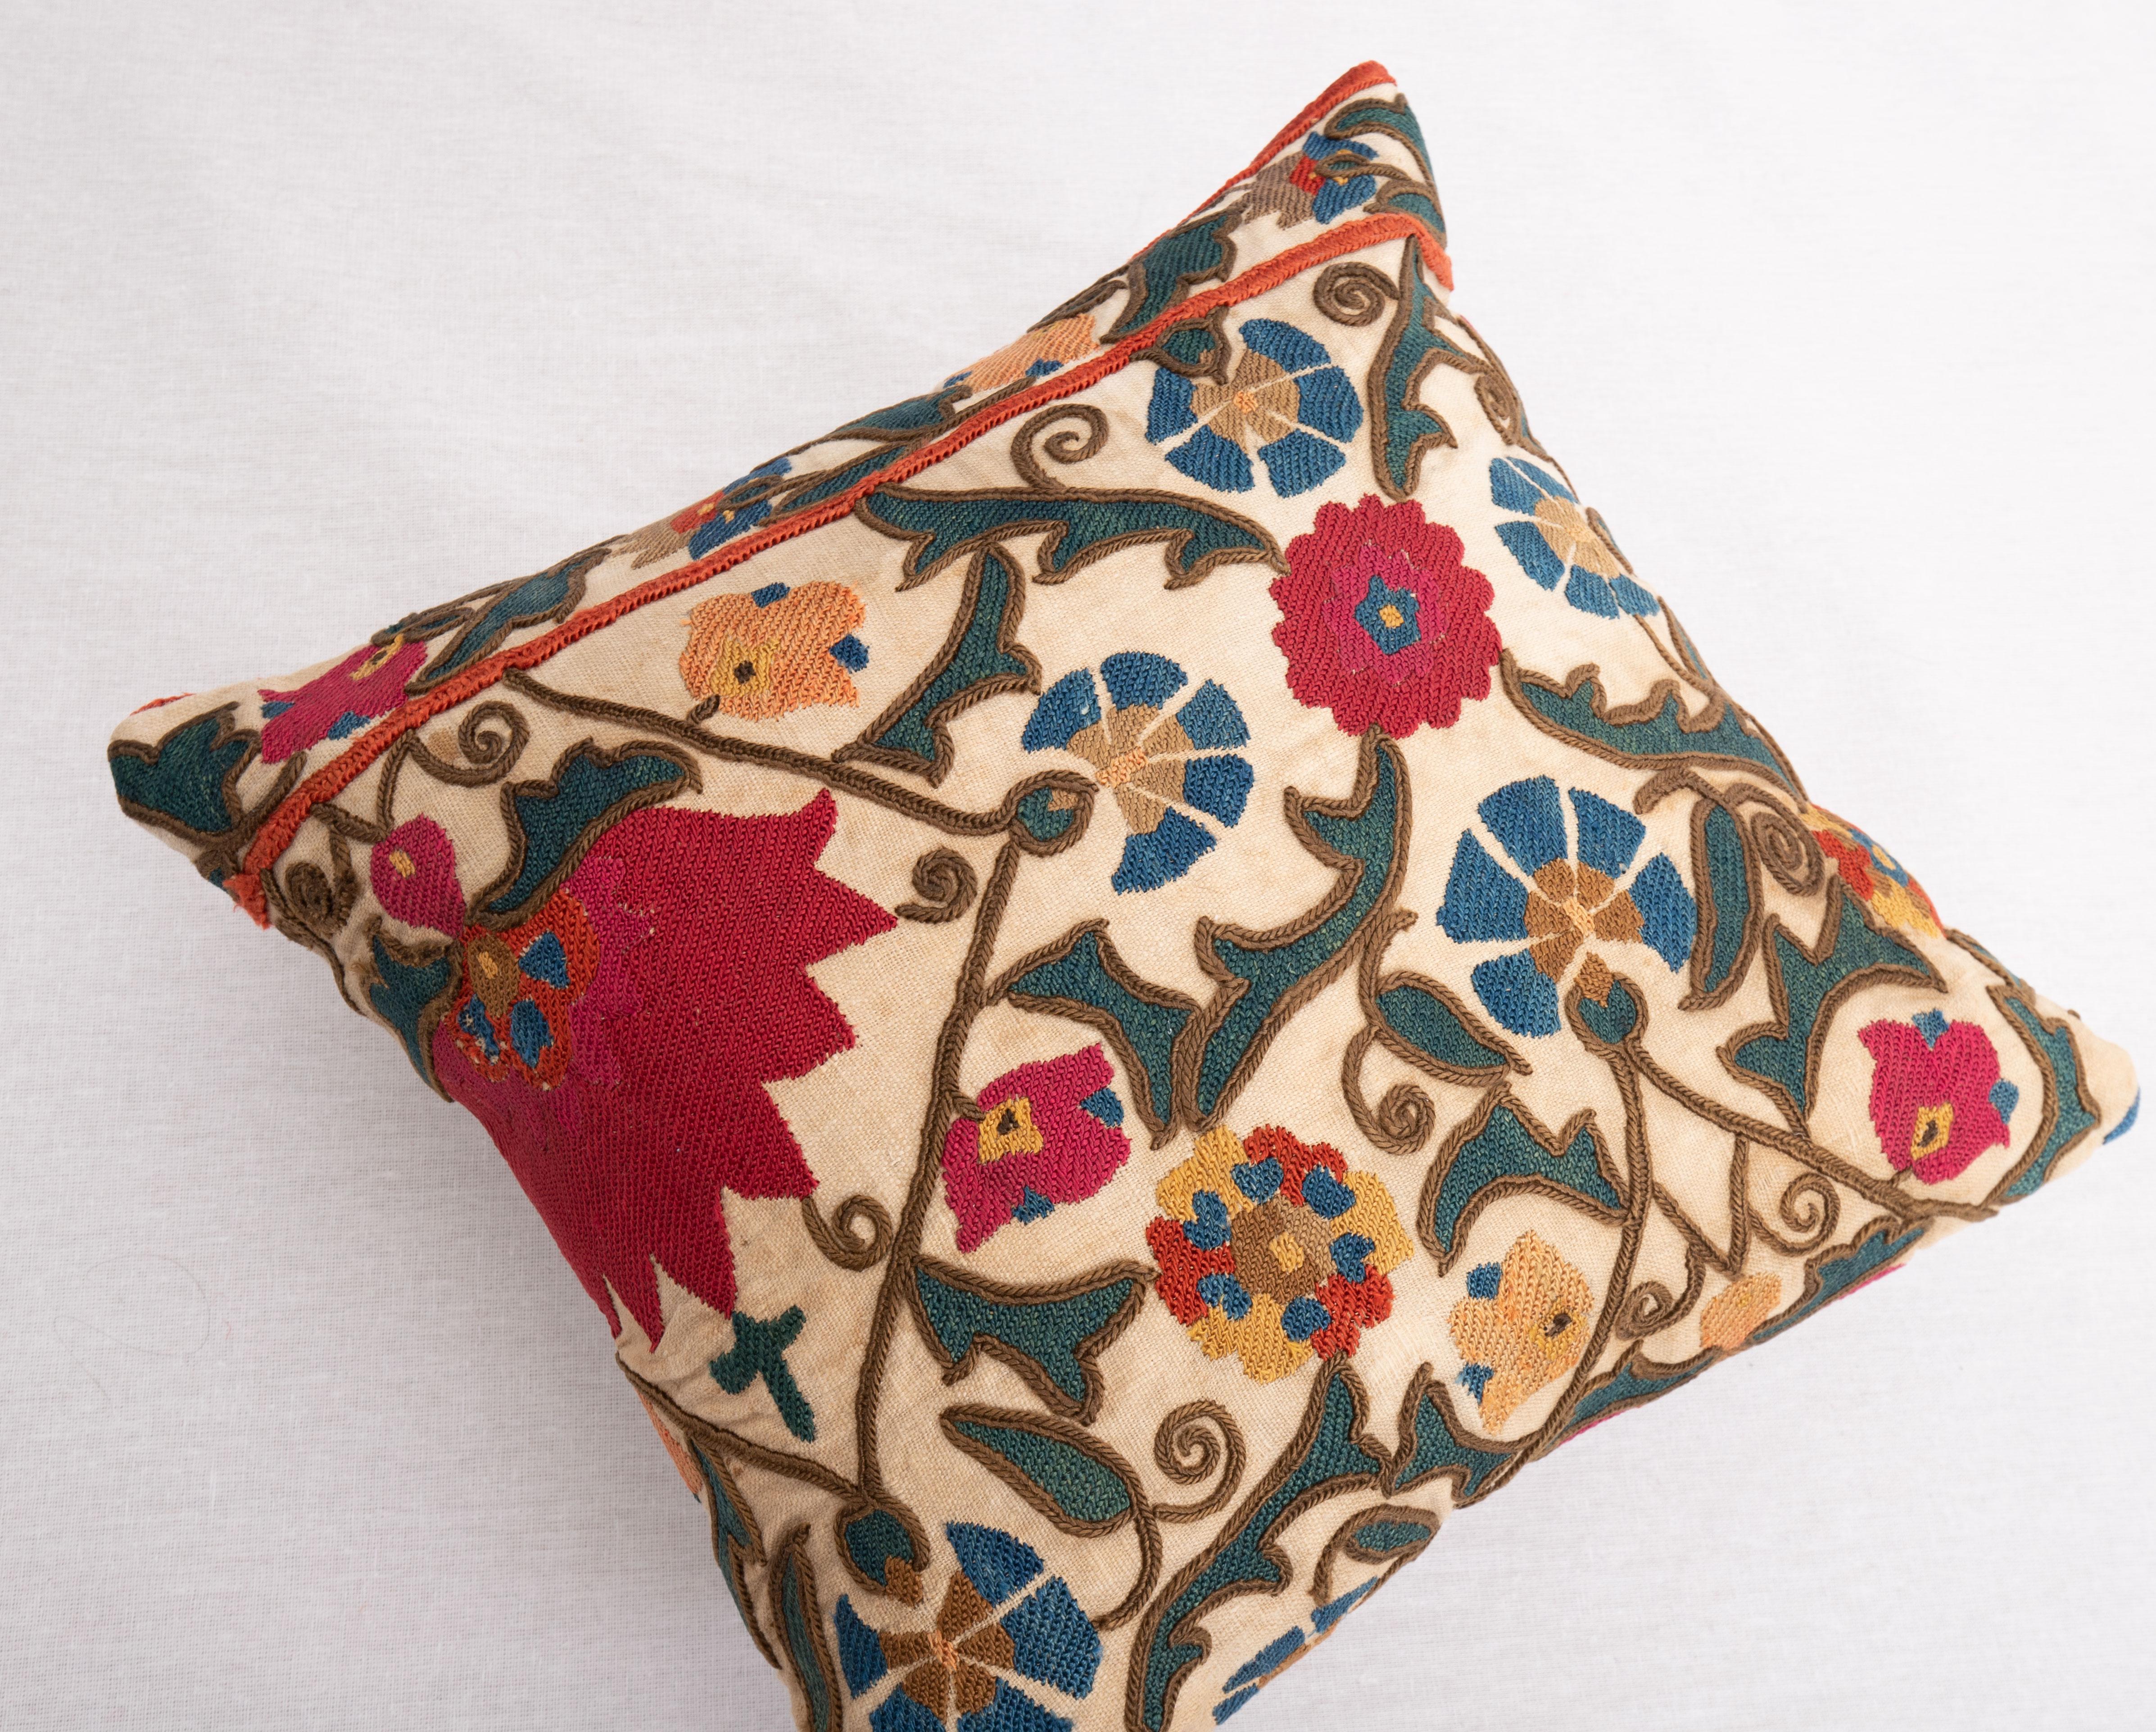 Silk Suzani Pillow Case Made from an Antique Suzani Fragment, 19th Century